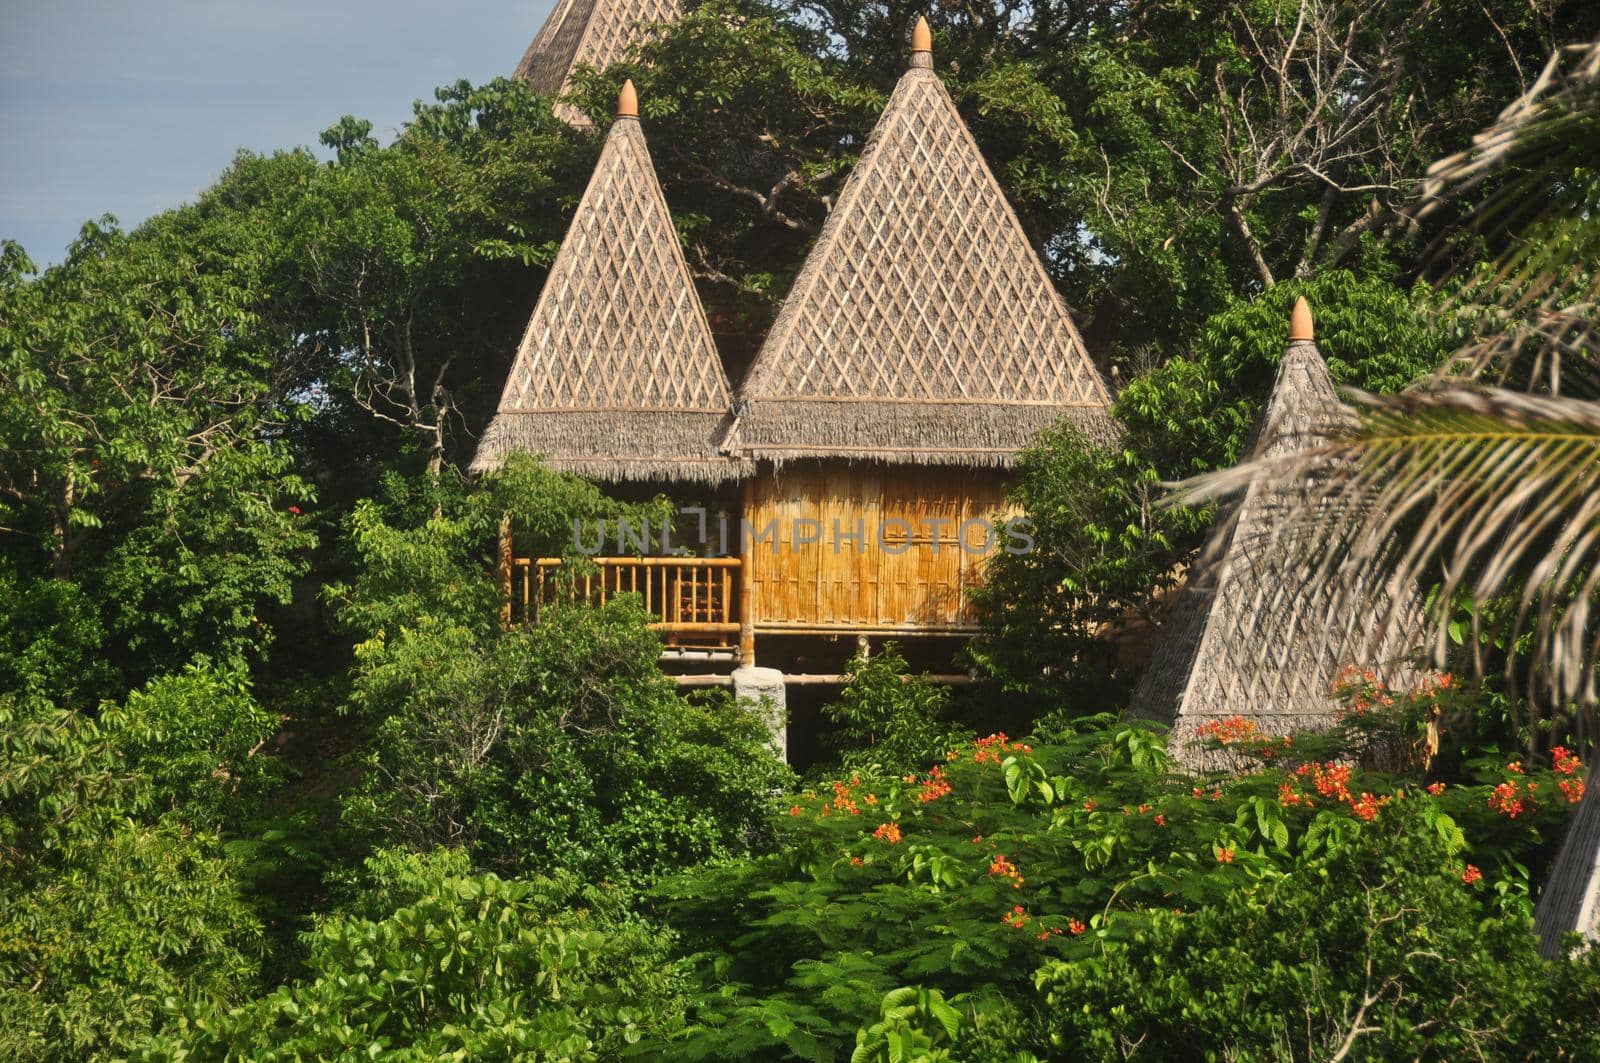 View of wooden houses with conic thatched roofs in bright green tropical vegetation. Thatched houses in lush tropical vegetation. Paradise exotic island life